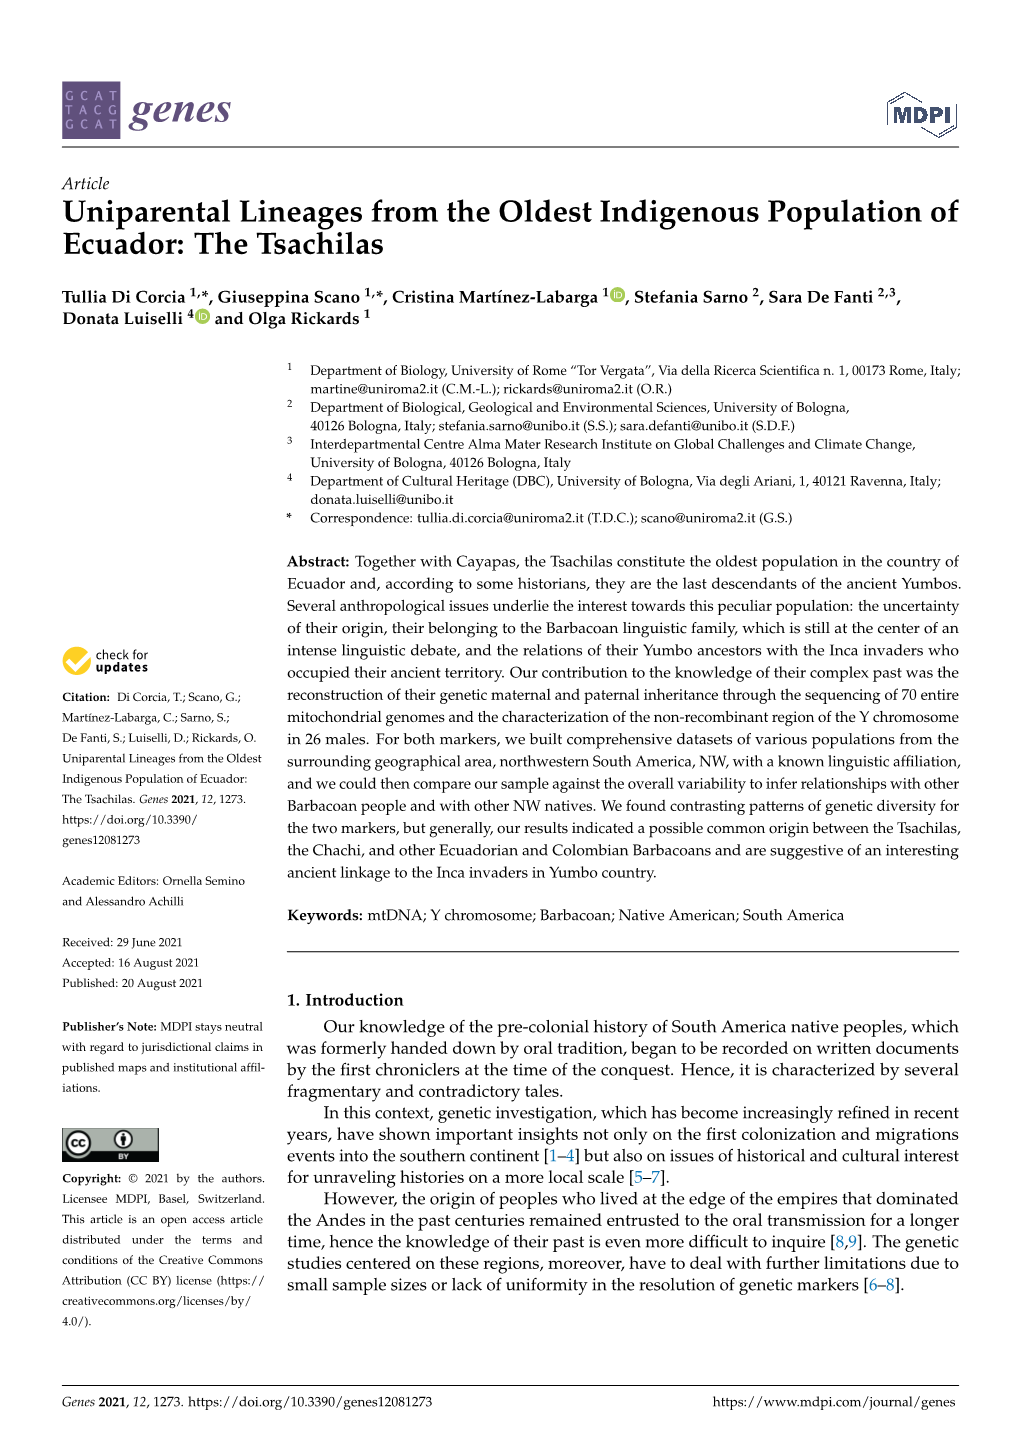 Uniparental Lineages from the Oldest Indigenous Population of Ecuador: the Tsachilas